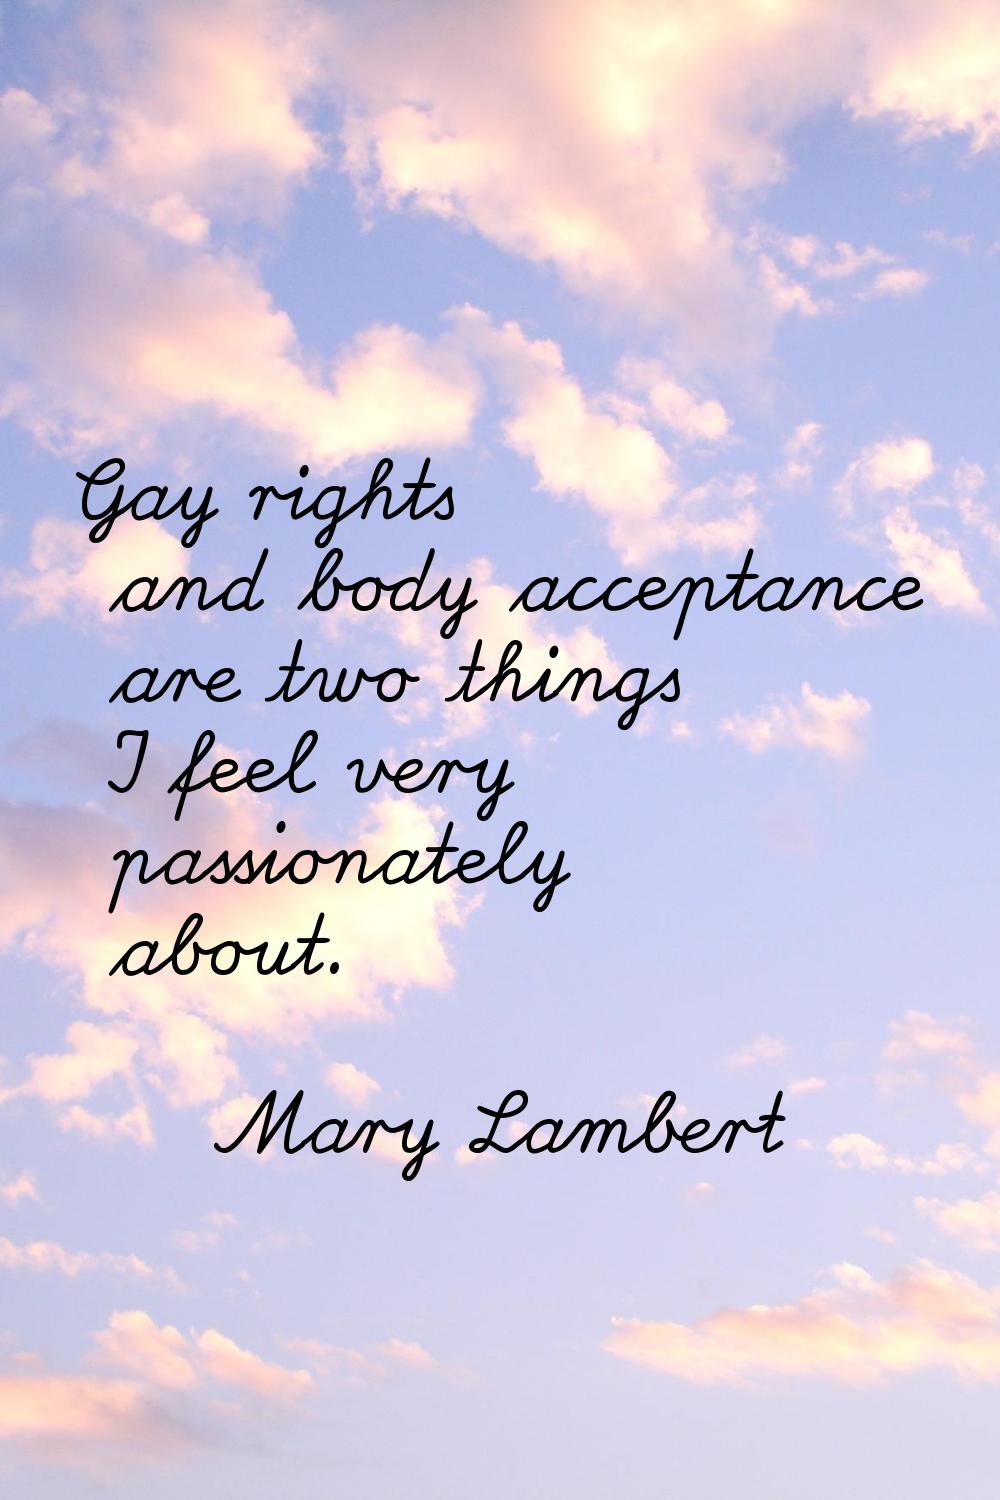 Gay rights and body acceptance are two things I feel very passionately about.